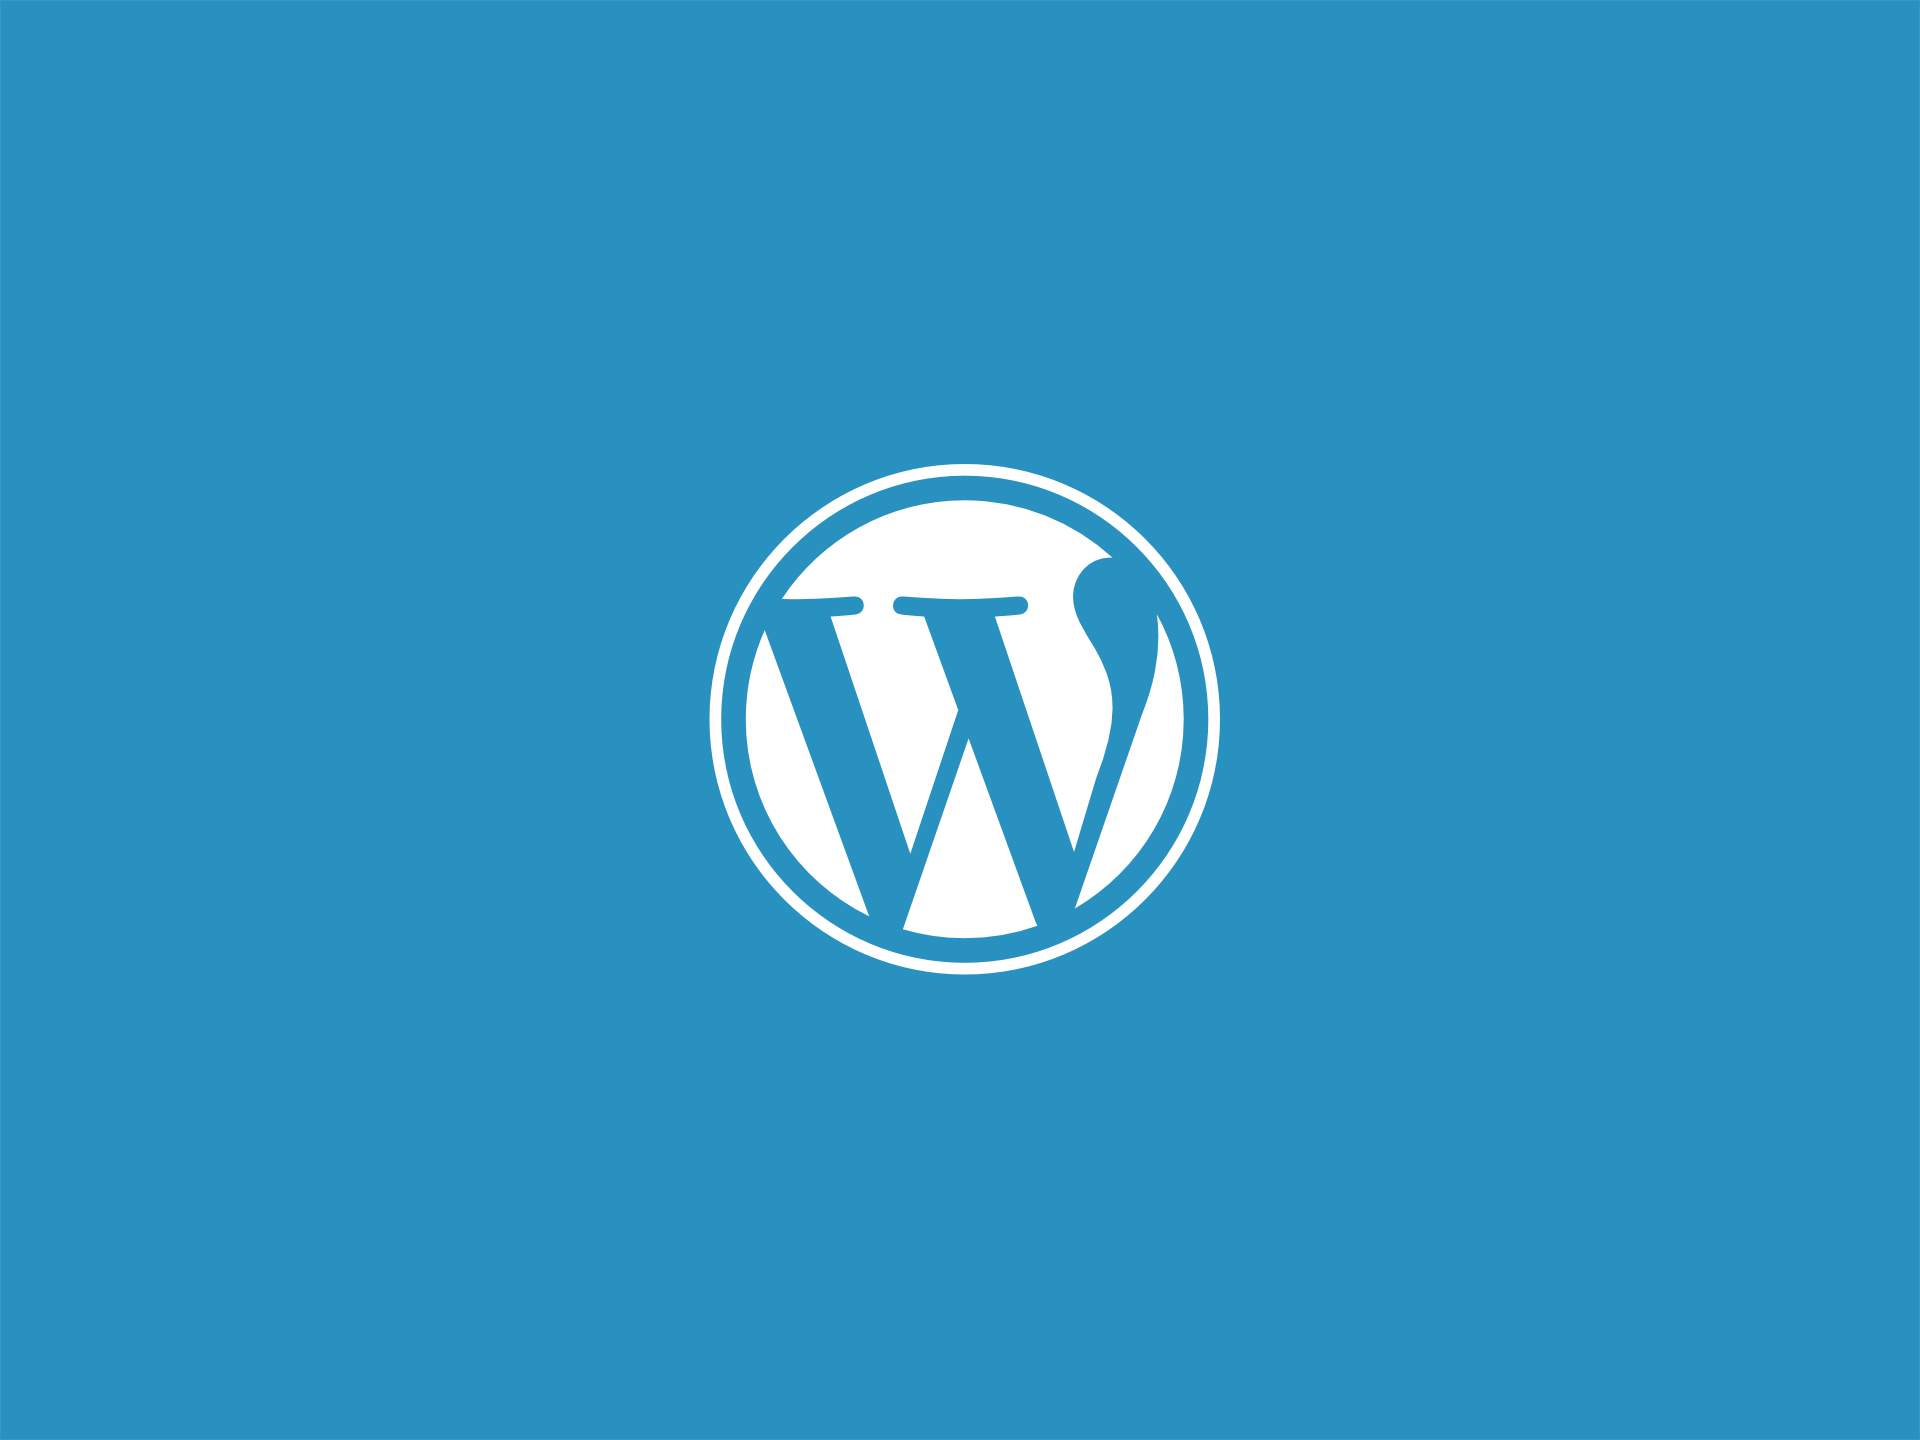 WordPress: responsive images for mobile devices with the wp_is_mobile() function